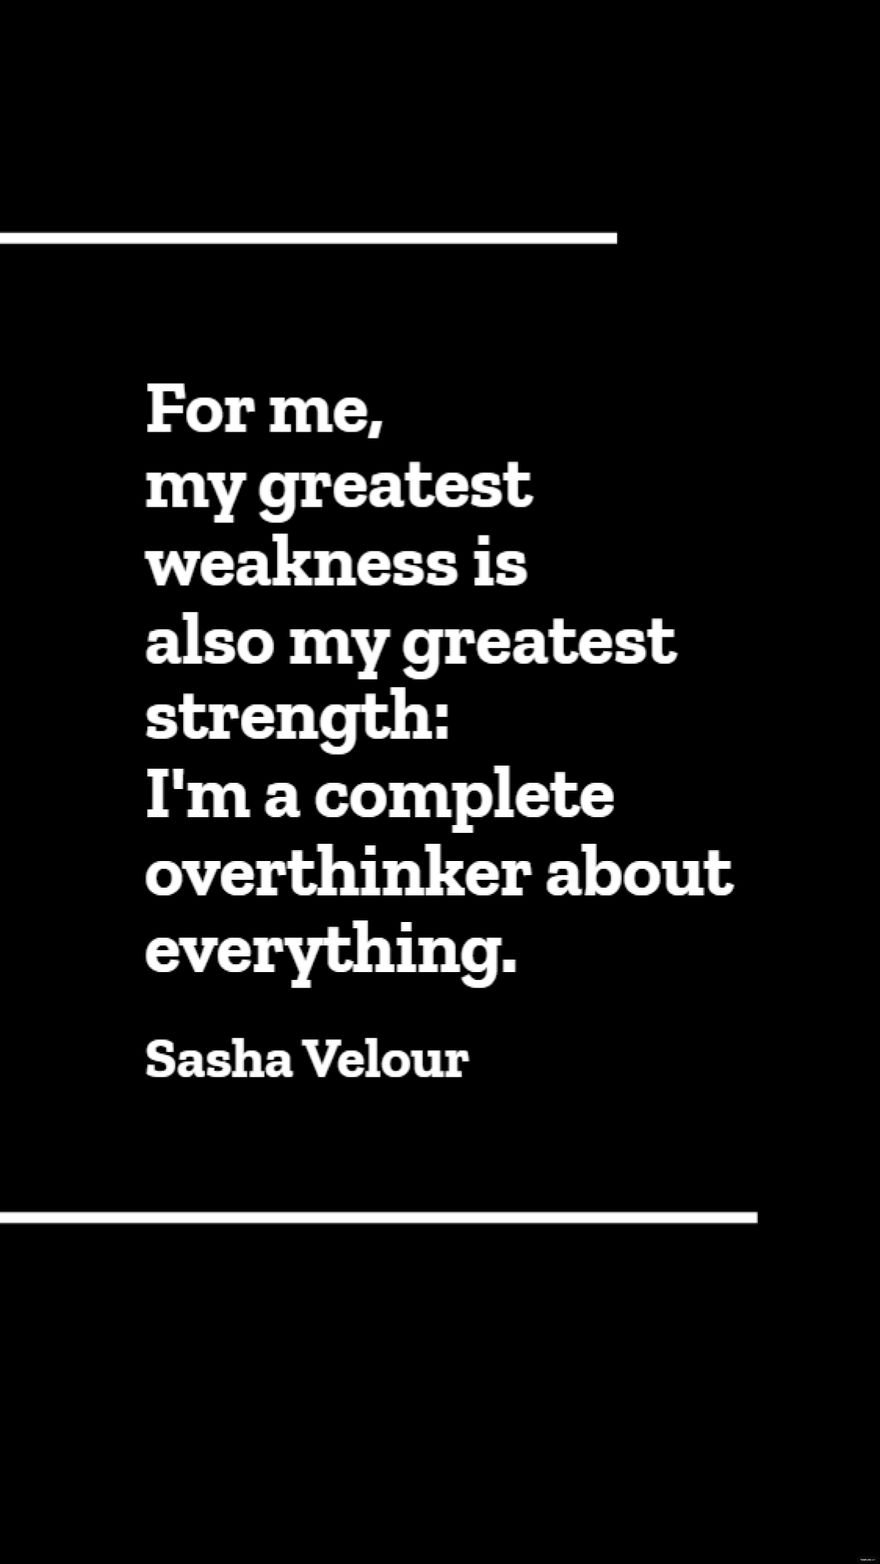 Sasha Velour - For me, my greatest weakness is also my greatest strength: I'm a complete overthinker about everything.